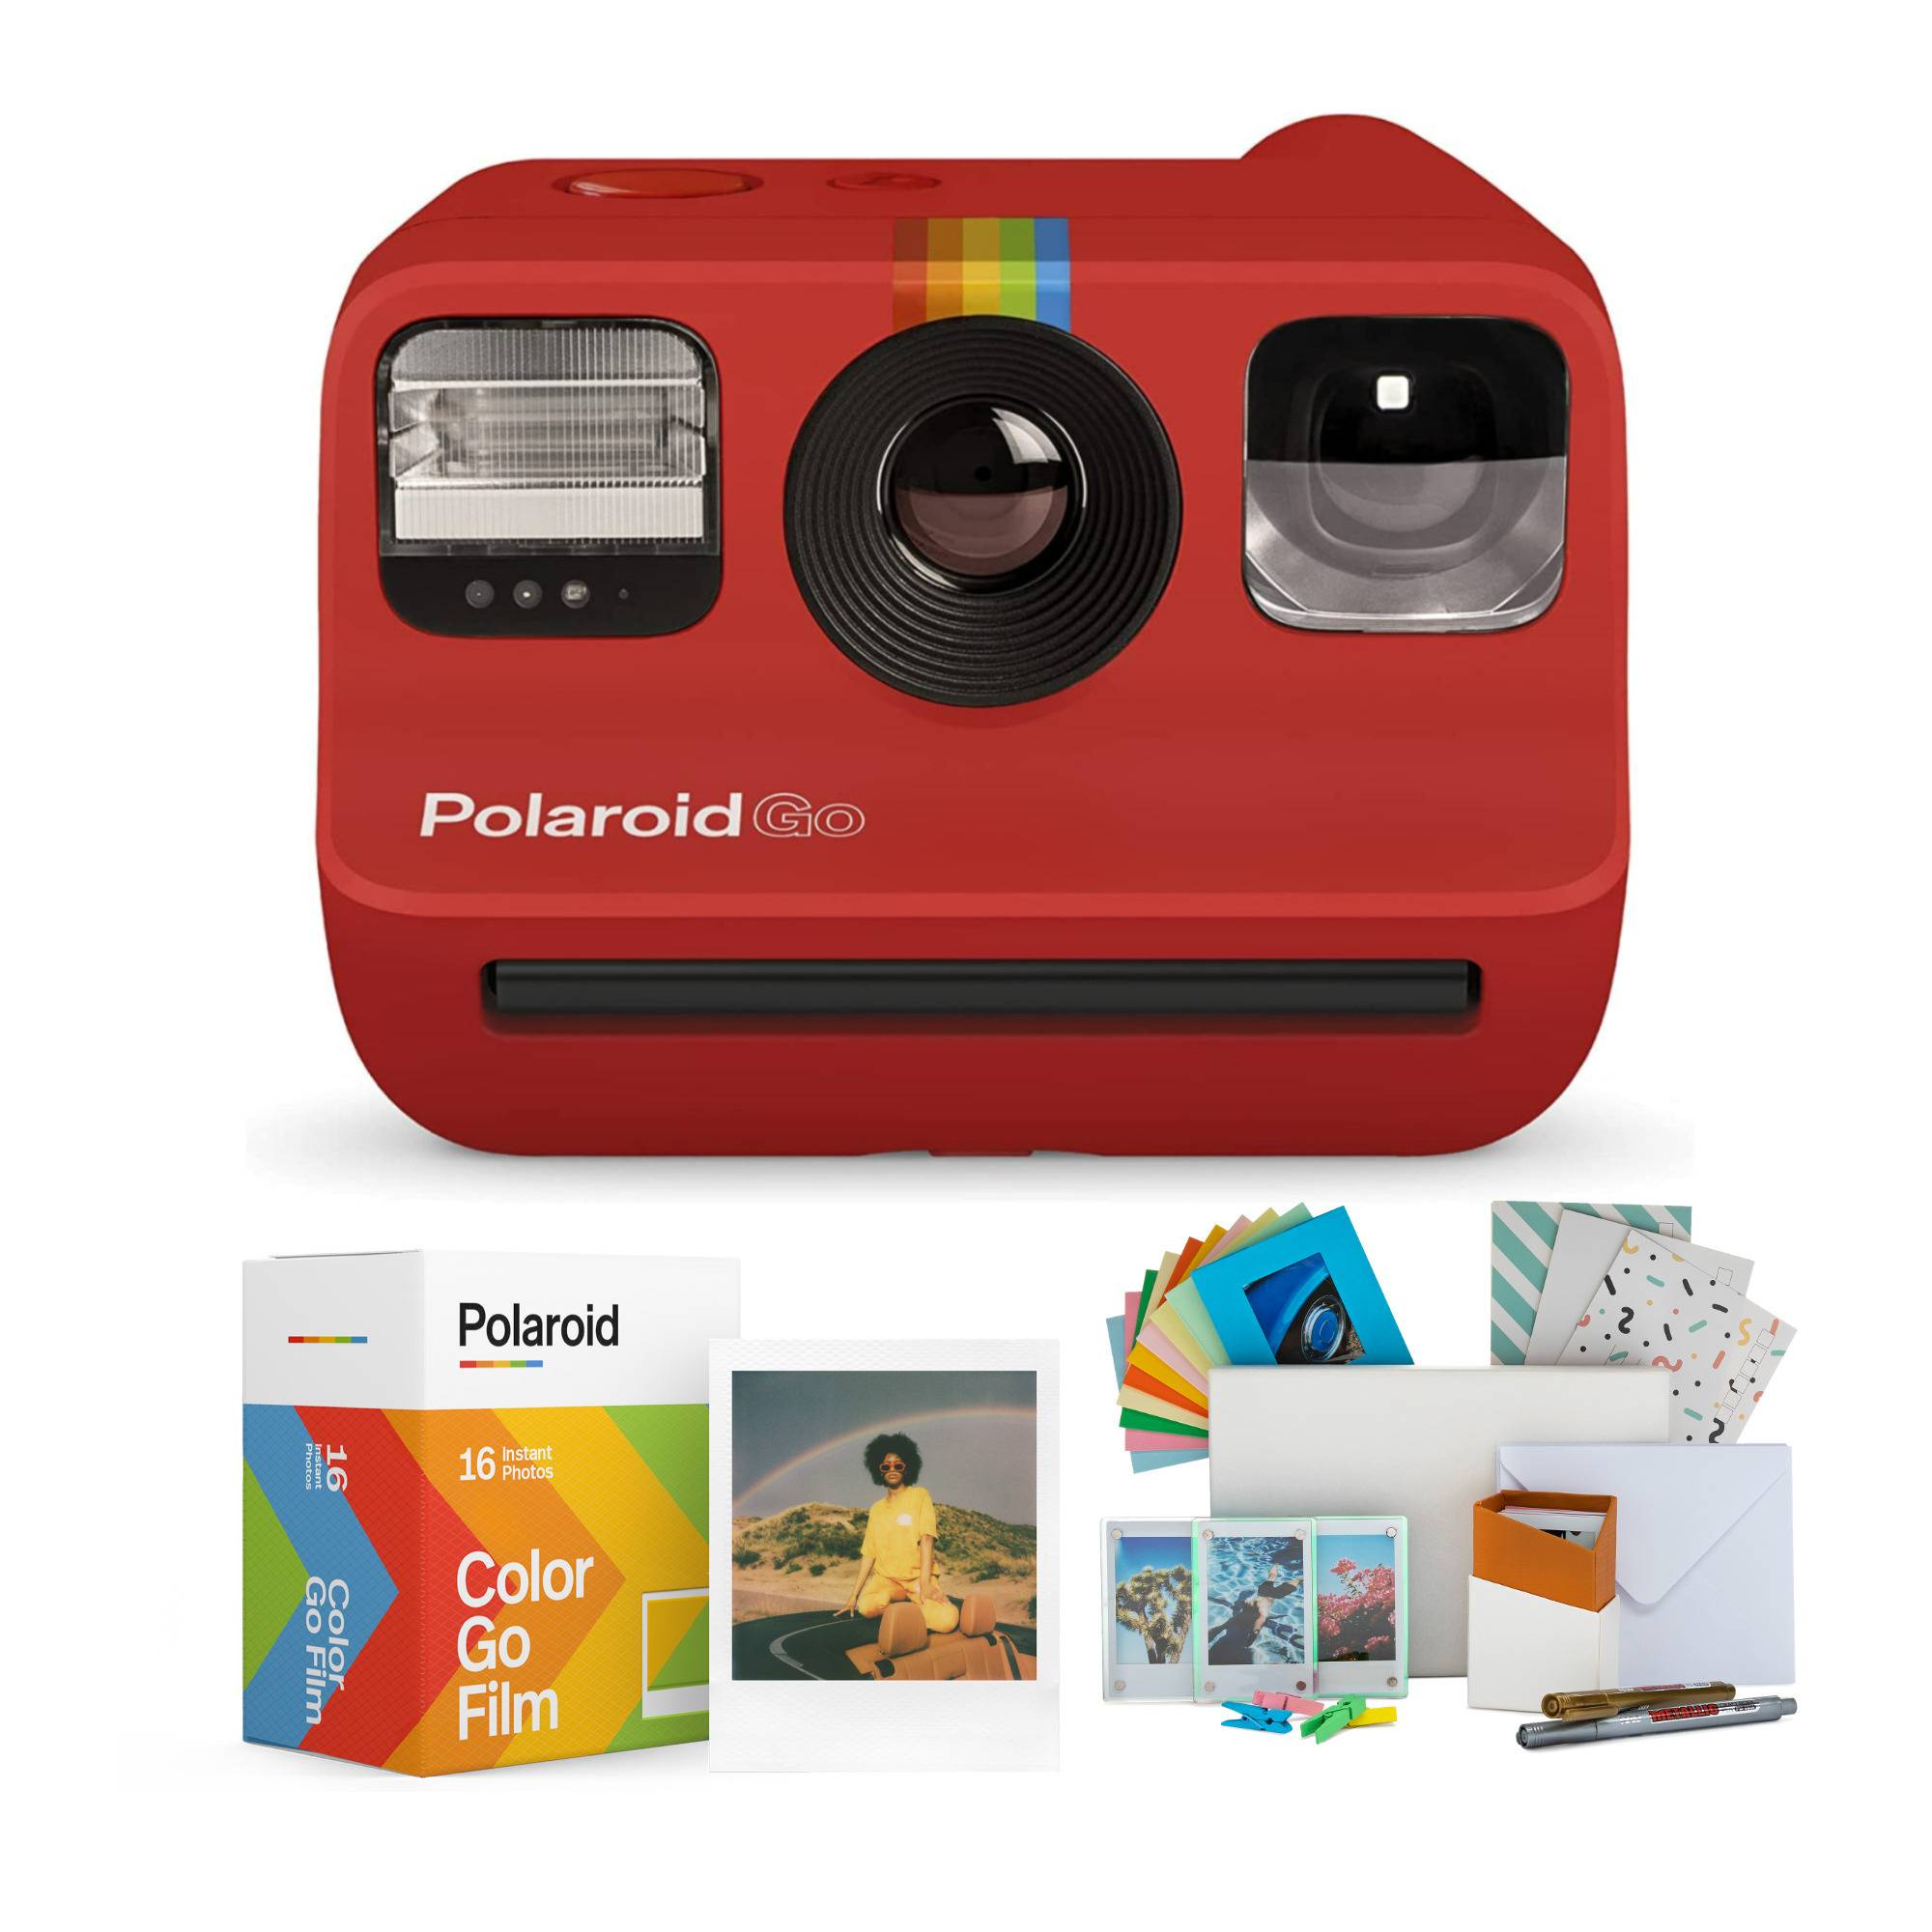 Polaroid GO Instant Mini Camera (Red) with Color Film and Everything PhotoBox